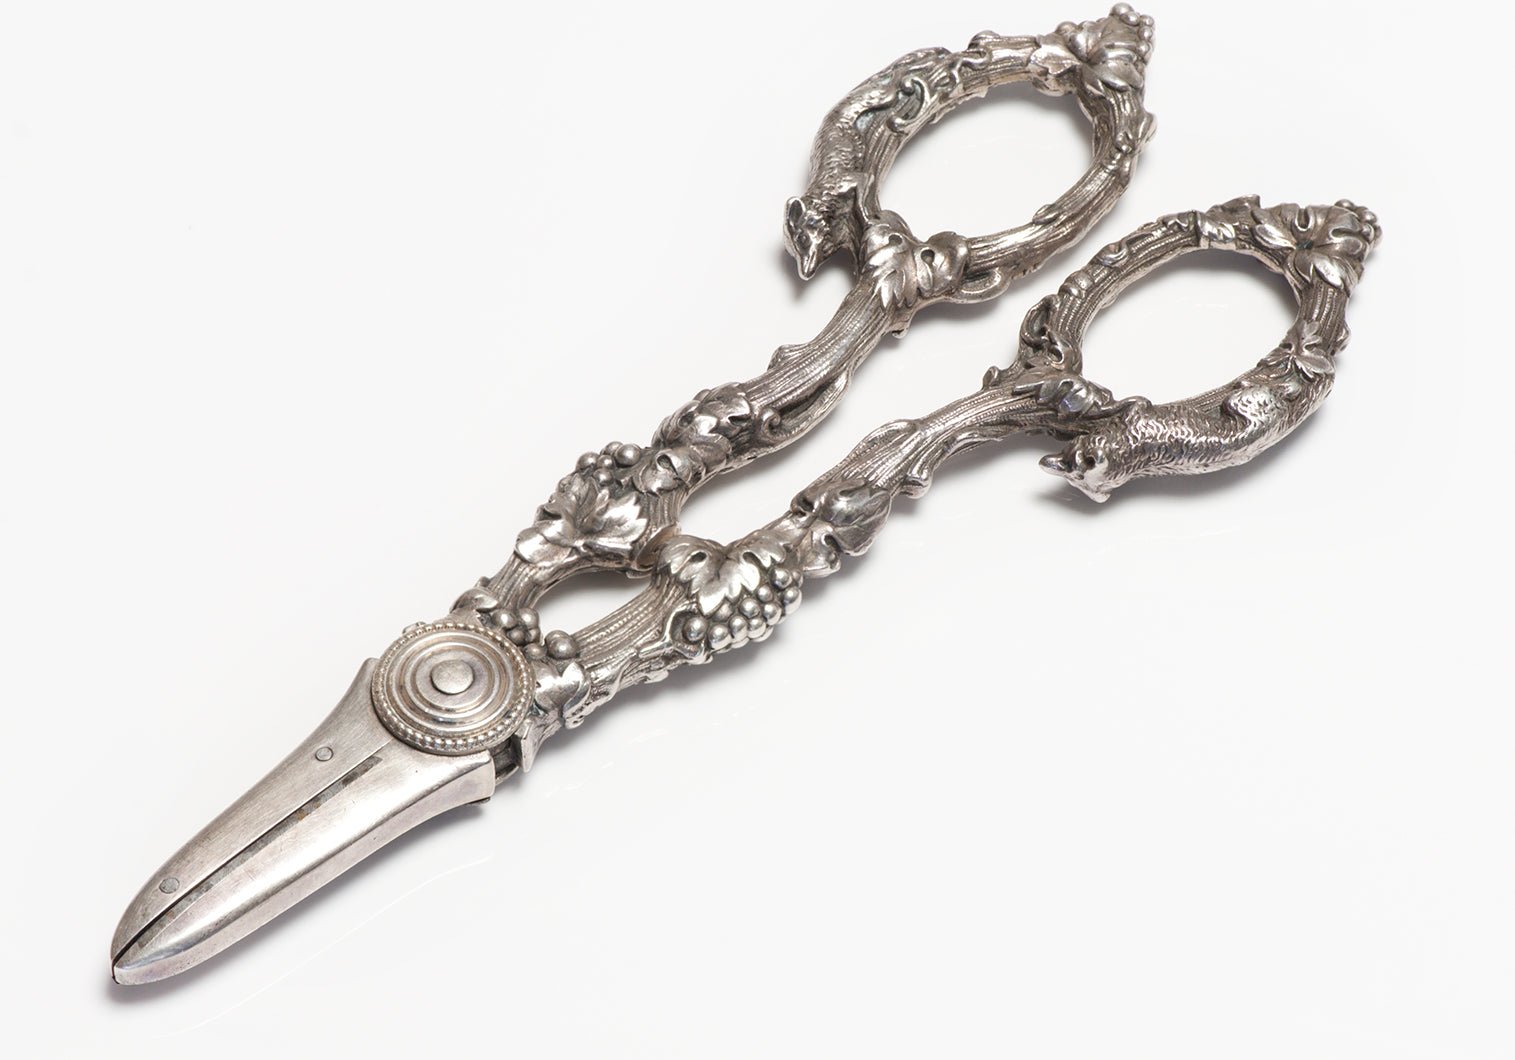 Antique Gorham Sterling Silver Grape Shears "Fox and Grape" Pattern